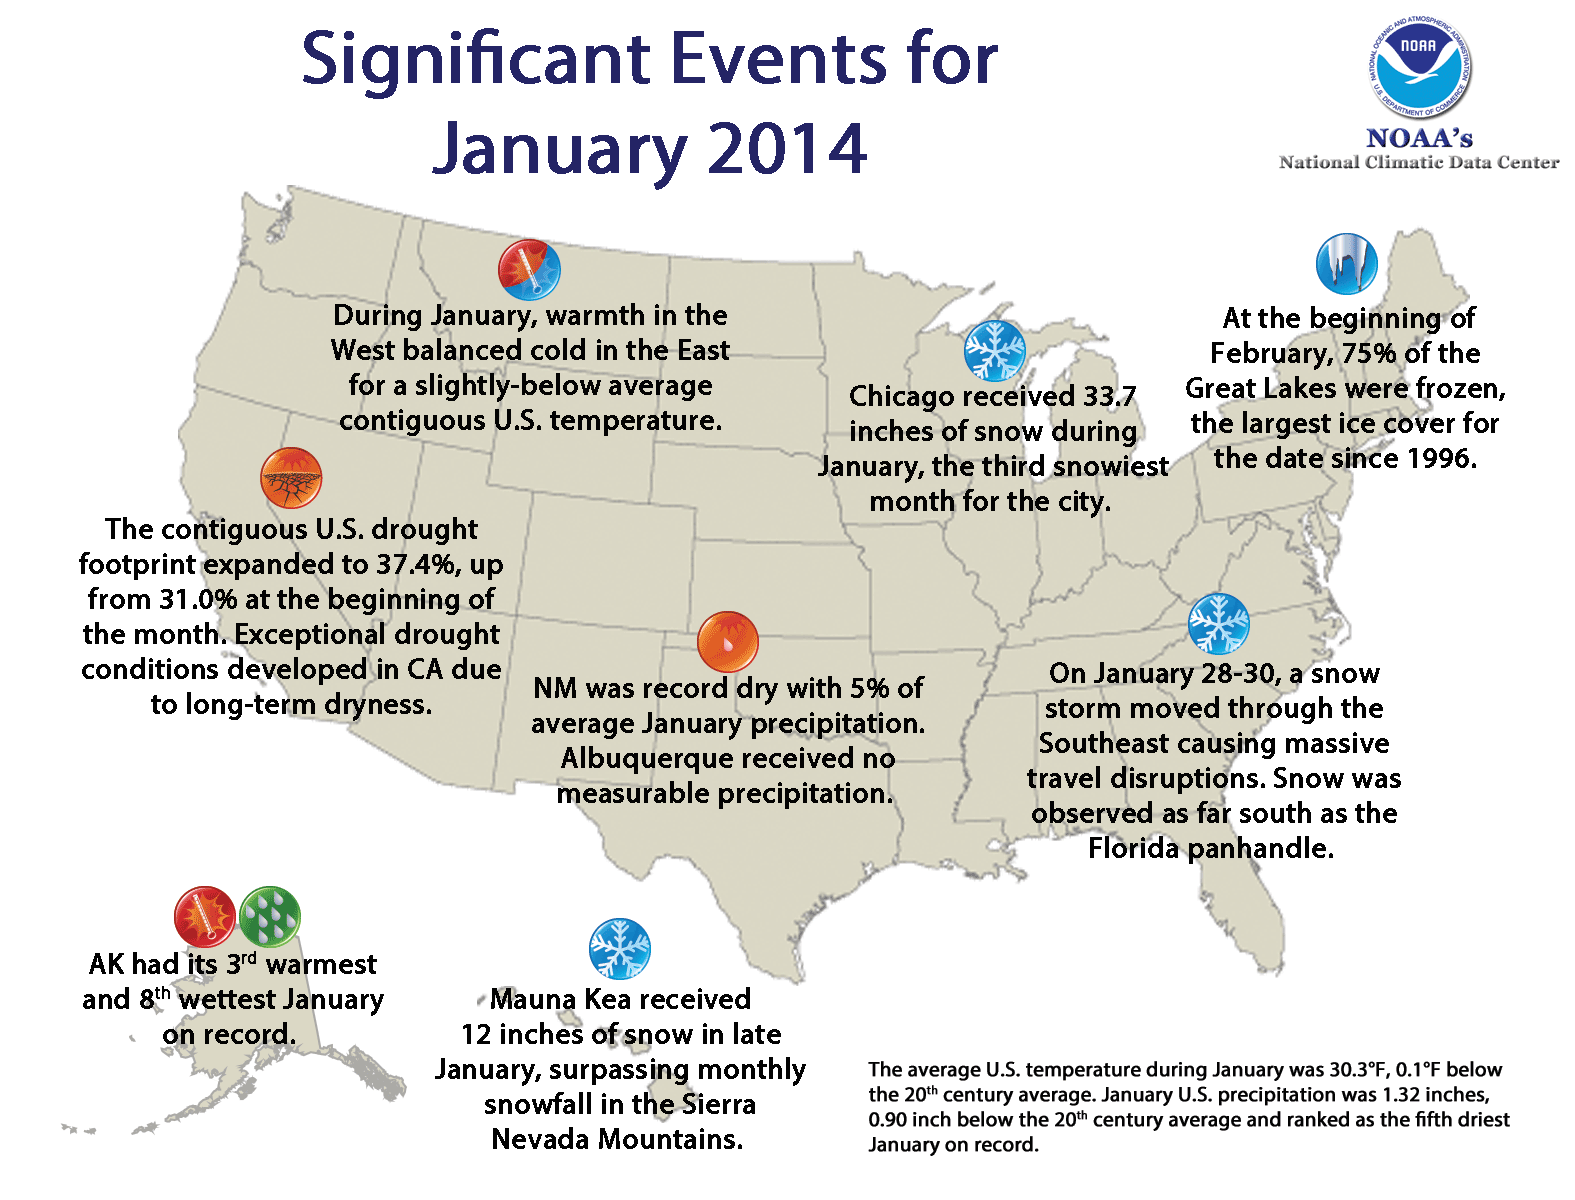 View larger. | January 2014 overview via NOAA's National Climatic Data Center.